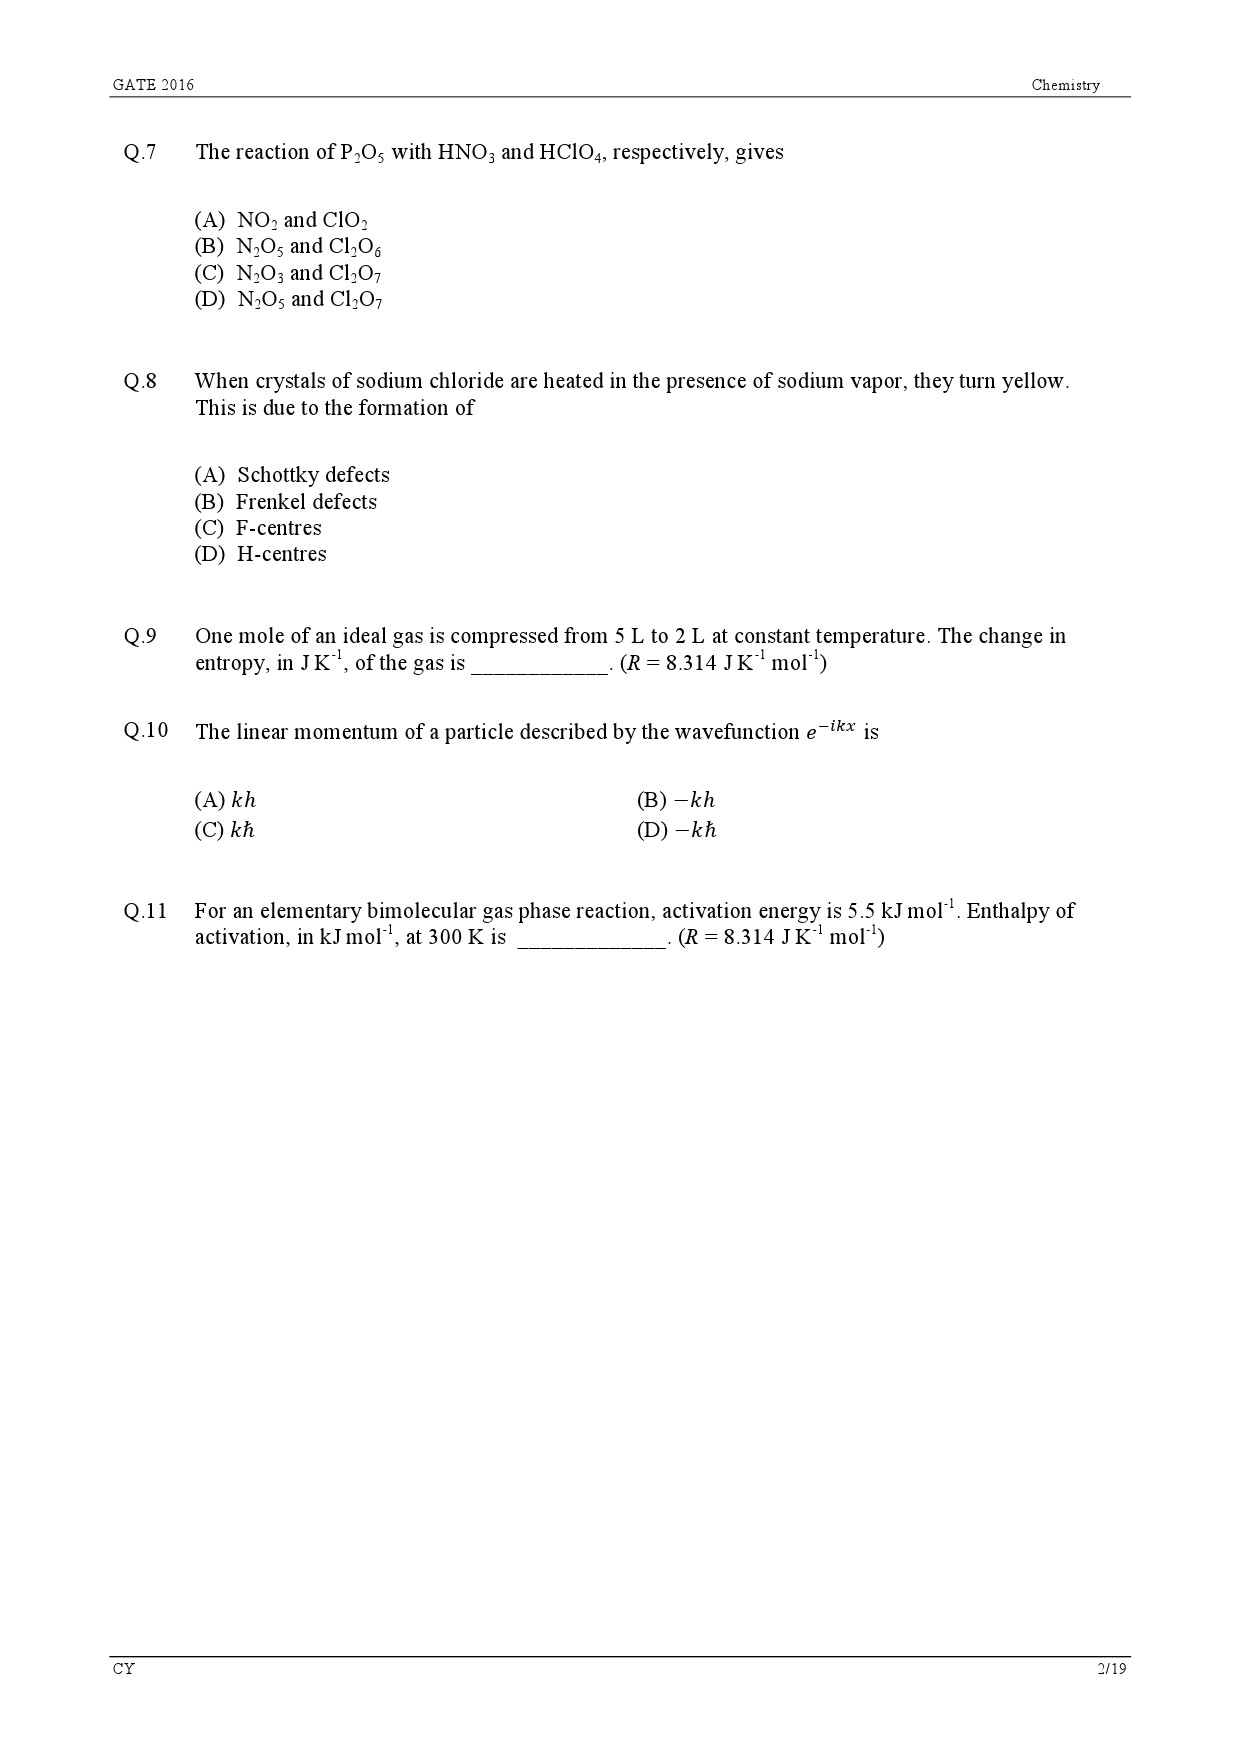 GATE Exam Question Paper 2016 Chemistry 5